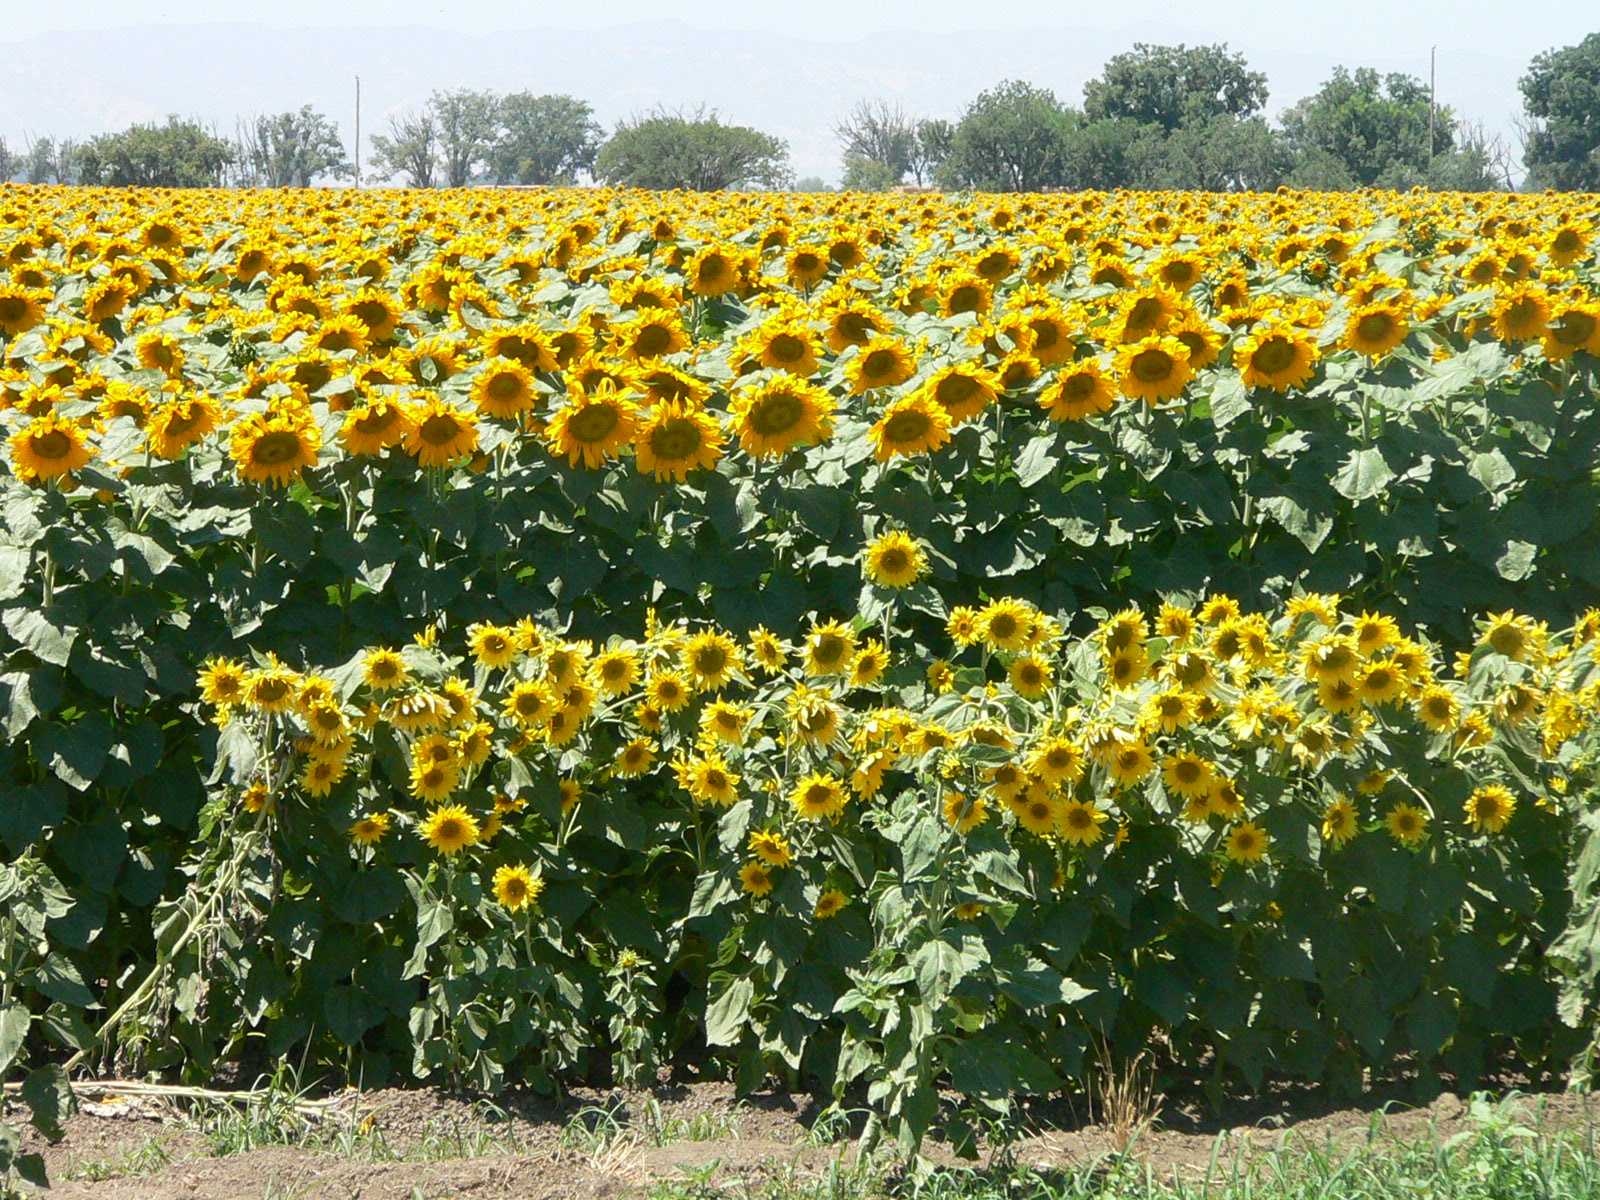 a sunflower field in a rural area with a sky background